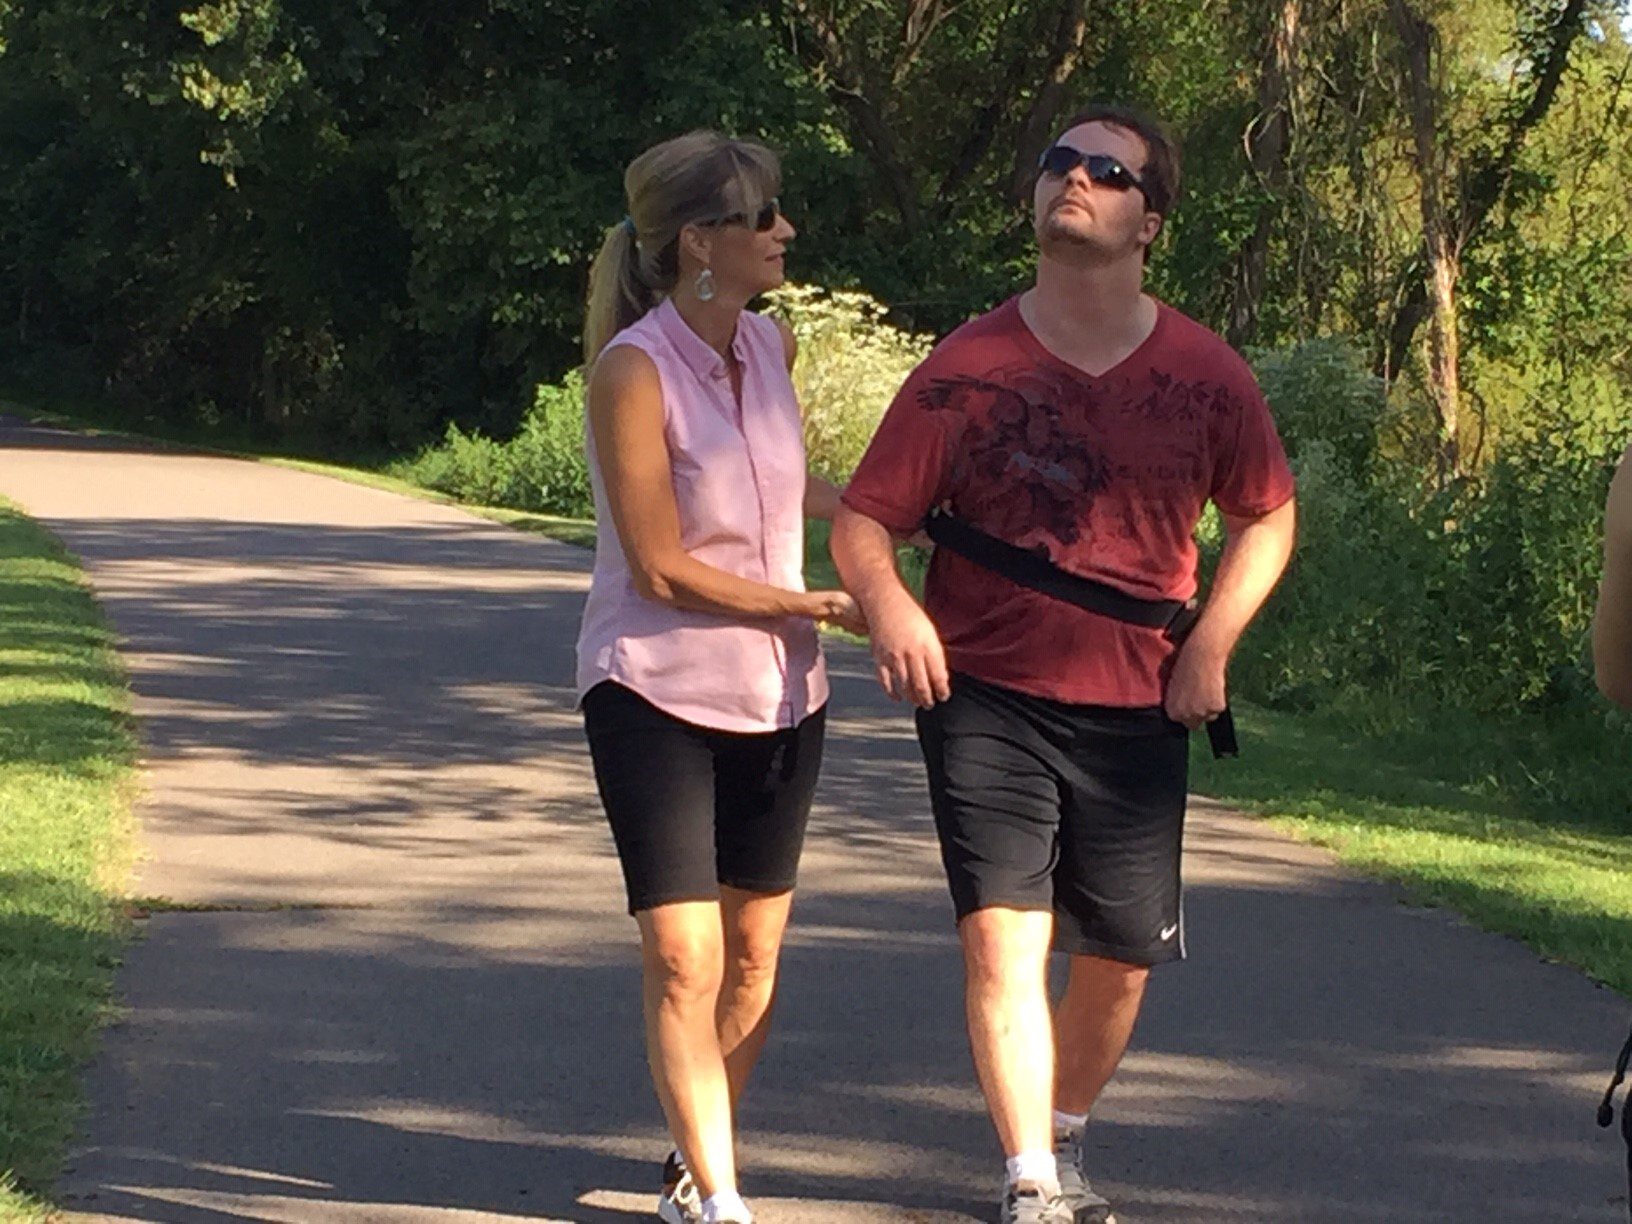 Luke Walking with his mom in the park